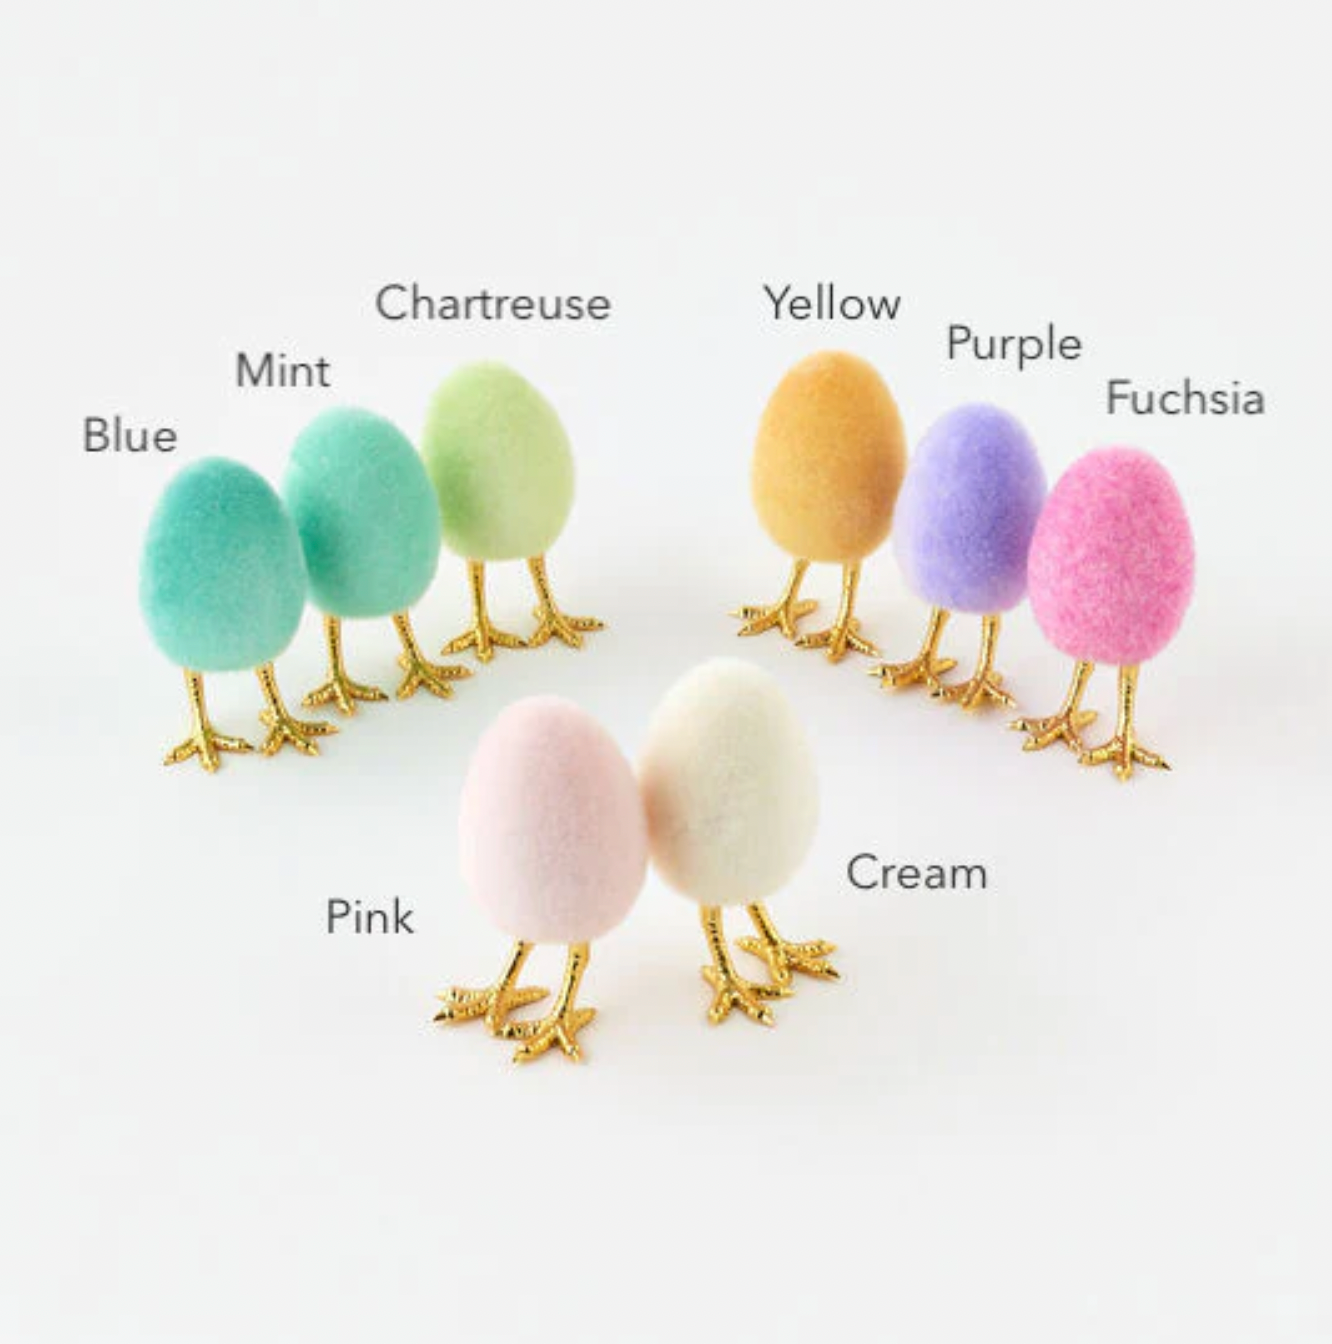 Flocked Egg With Feet